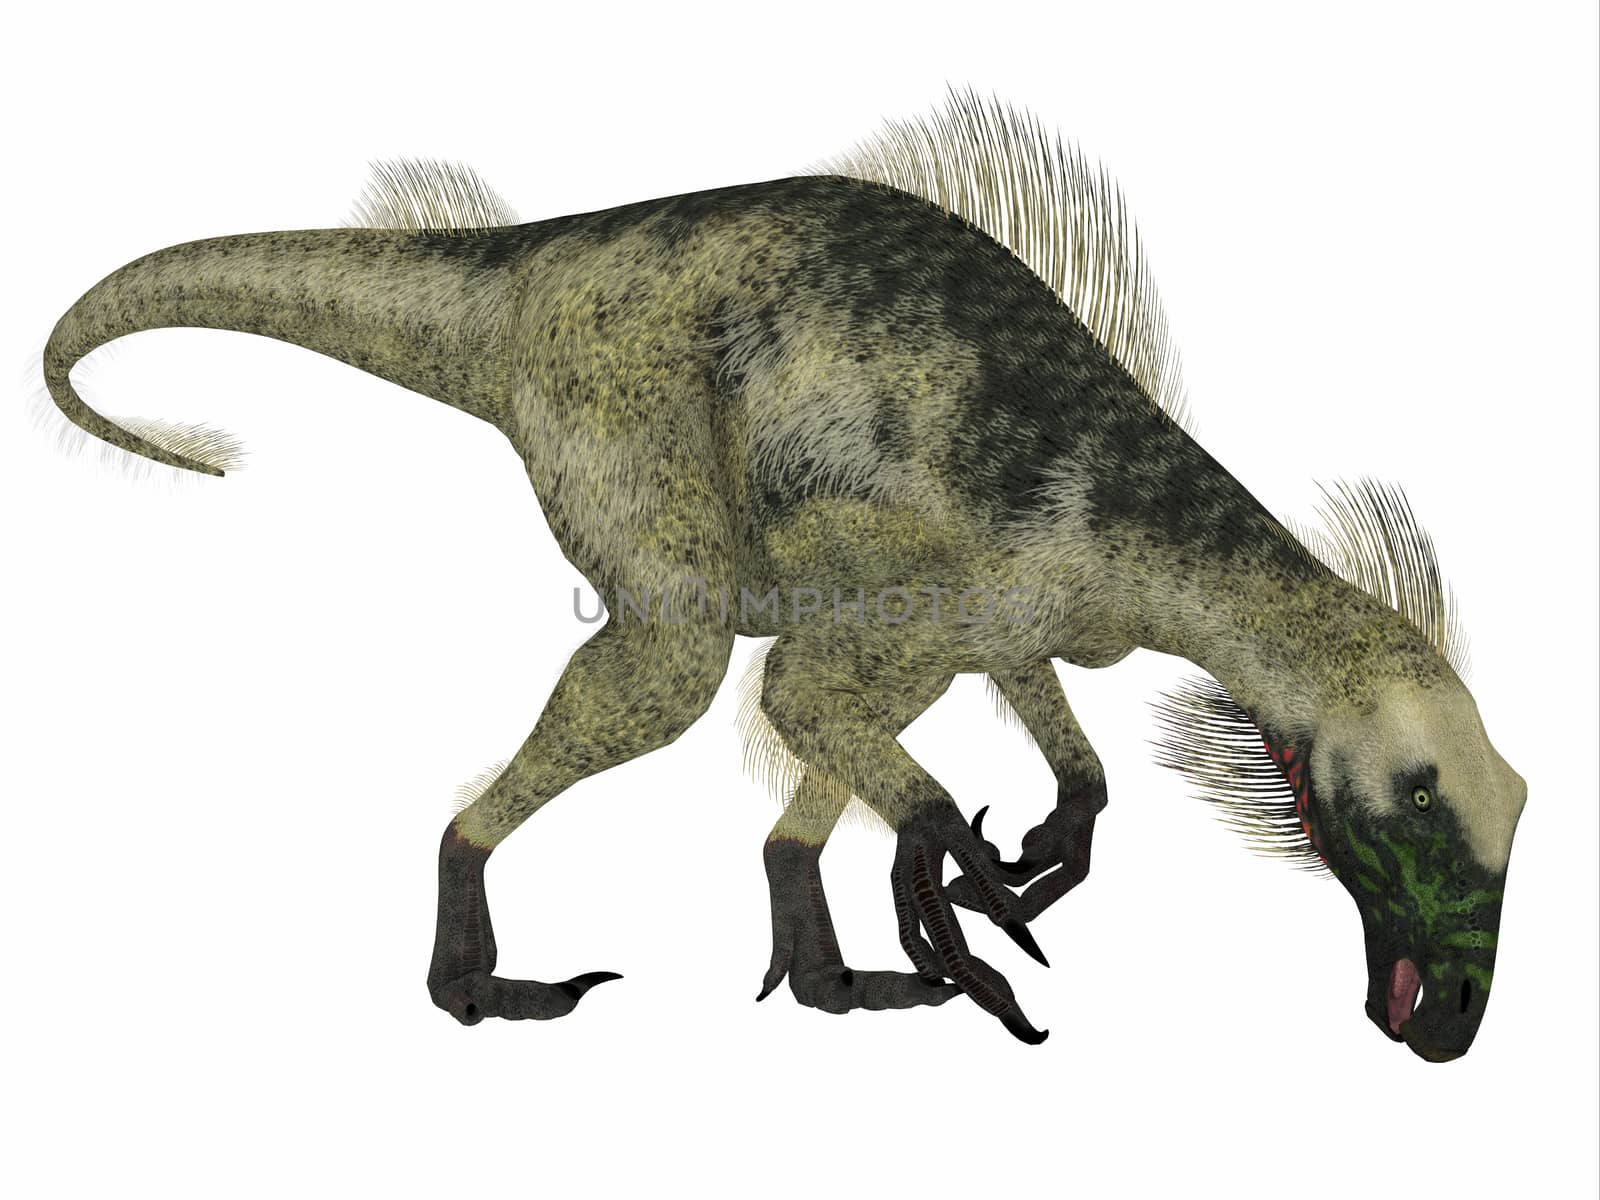 Beipiaosaurus was a herbivorous theropod dinosaur that lived in China in the Cretaceous Period.